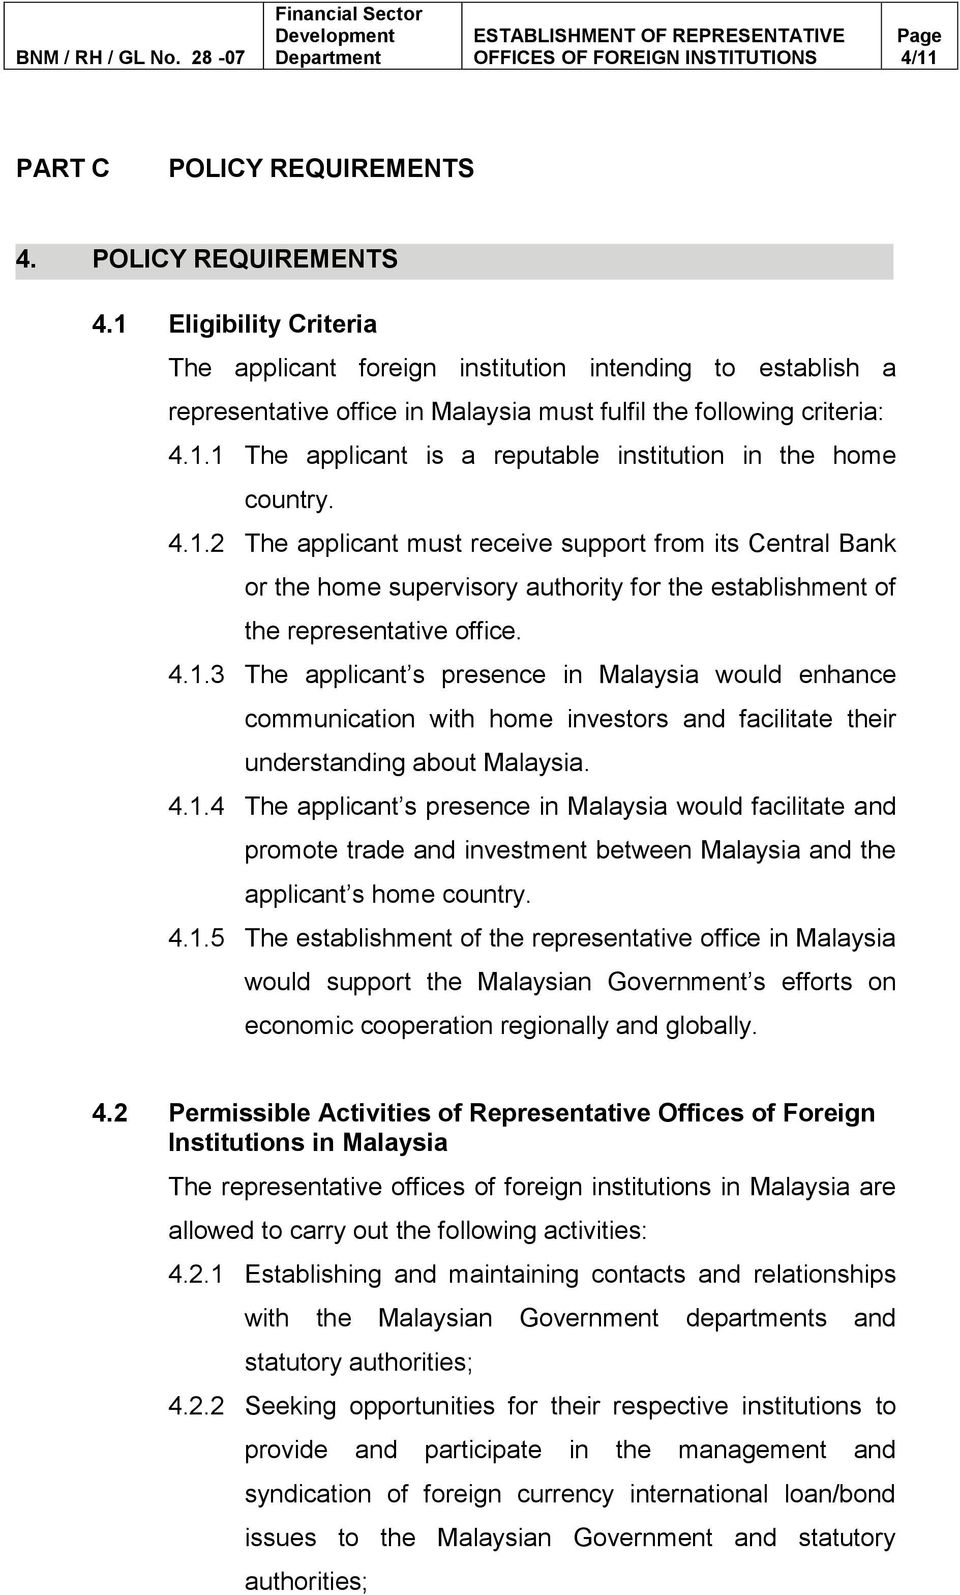 4.1.3 The applicant s presence in Malaysia would enhance communication with home investors and facilitate their understanding about Malaysia. 4.1.4 The applicant s presence in Malaysia would facilitate and promote trade and investment between Malaysia and the applicant s home country.